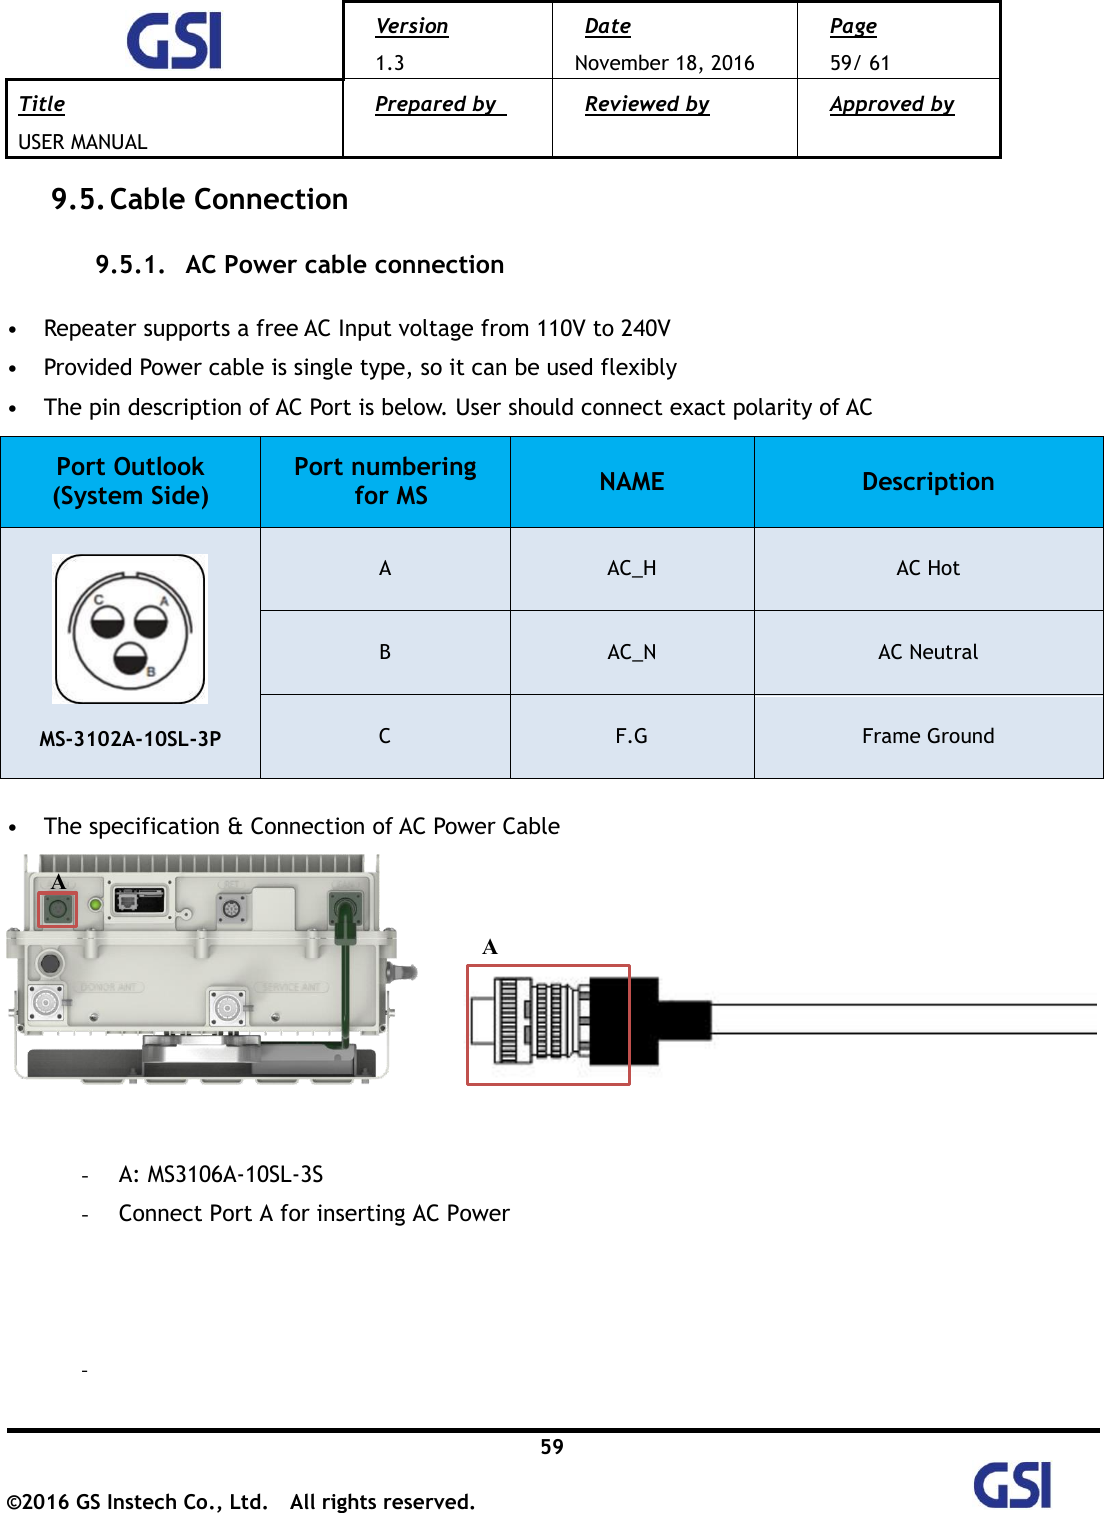  Version 1.3 Date November 18, 2016 Page 59/ 61 Title USER MANUAL Prepared by   Reviewed by  Approved by   59 ©2016 GS Instech Co., Ltd.  All rights reserved.   9.5. Cable Connection 9.5.1.   AC Power cable connection  • Repeater supports a free AC Input voltage from 110V to 240V • Provided Power cable is single type, so it can be used flexibly • The pin description of AC Port is below. User should connect exact polarity of AC Port Outlook (System Side) Port numbering   for MS NAME Description   MS-3102A-10SL-3P A AC_H AC Hot B AC_N AC Neutral C F.G Frame Ground  • The specification &amp; Connection of AC Power Cable          - A: MS3106A-10SL-3S - Connect Port A for inserting AC Power    -  A A 